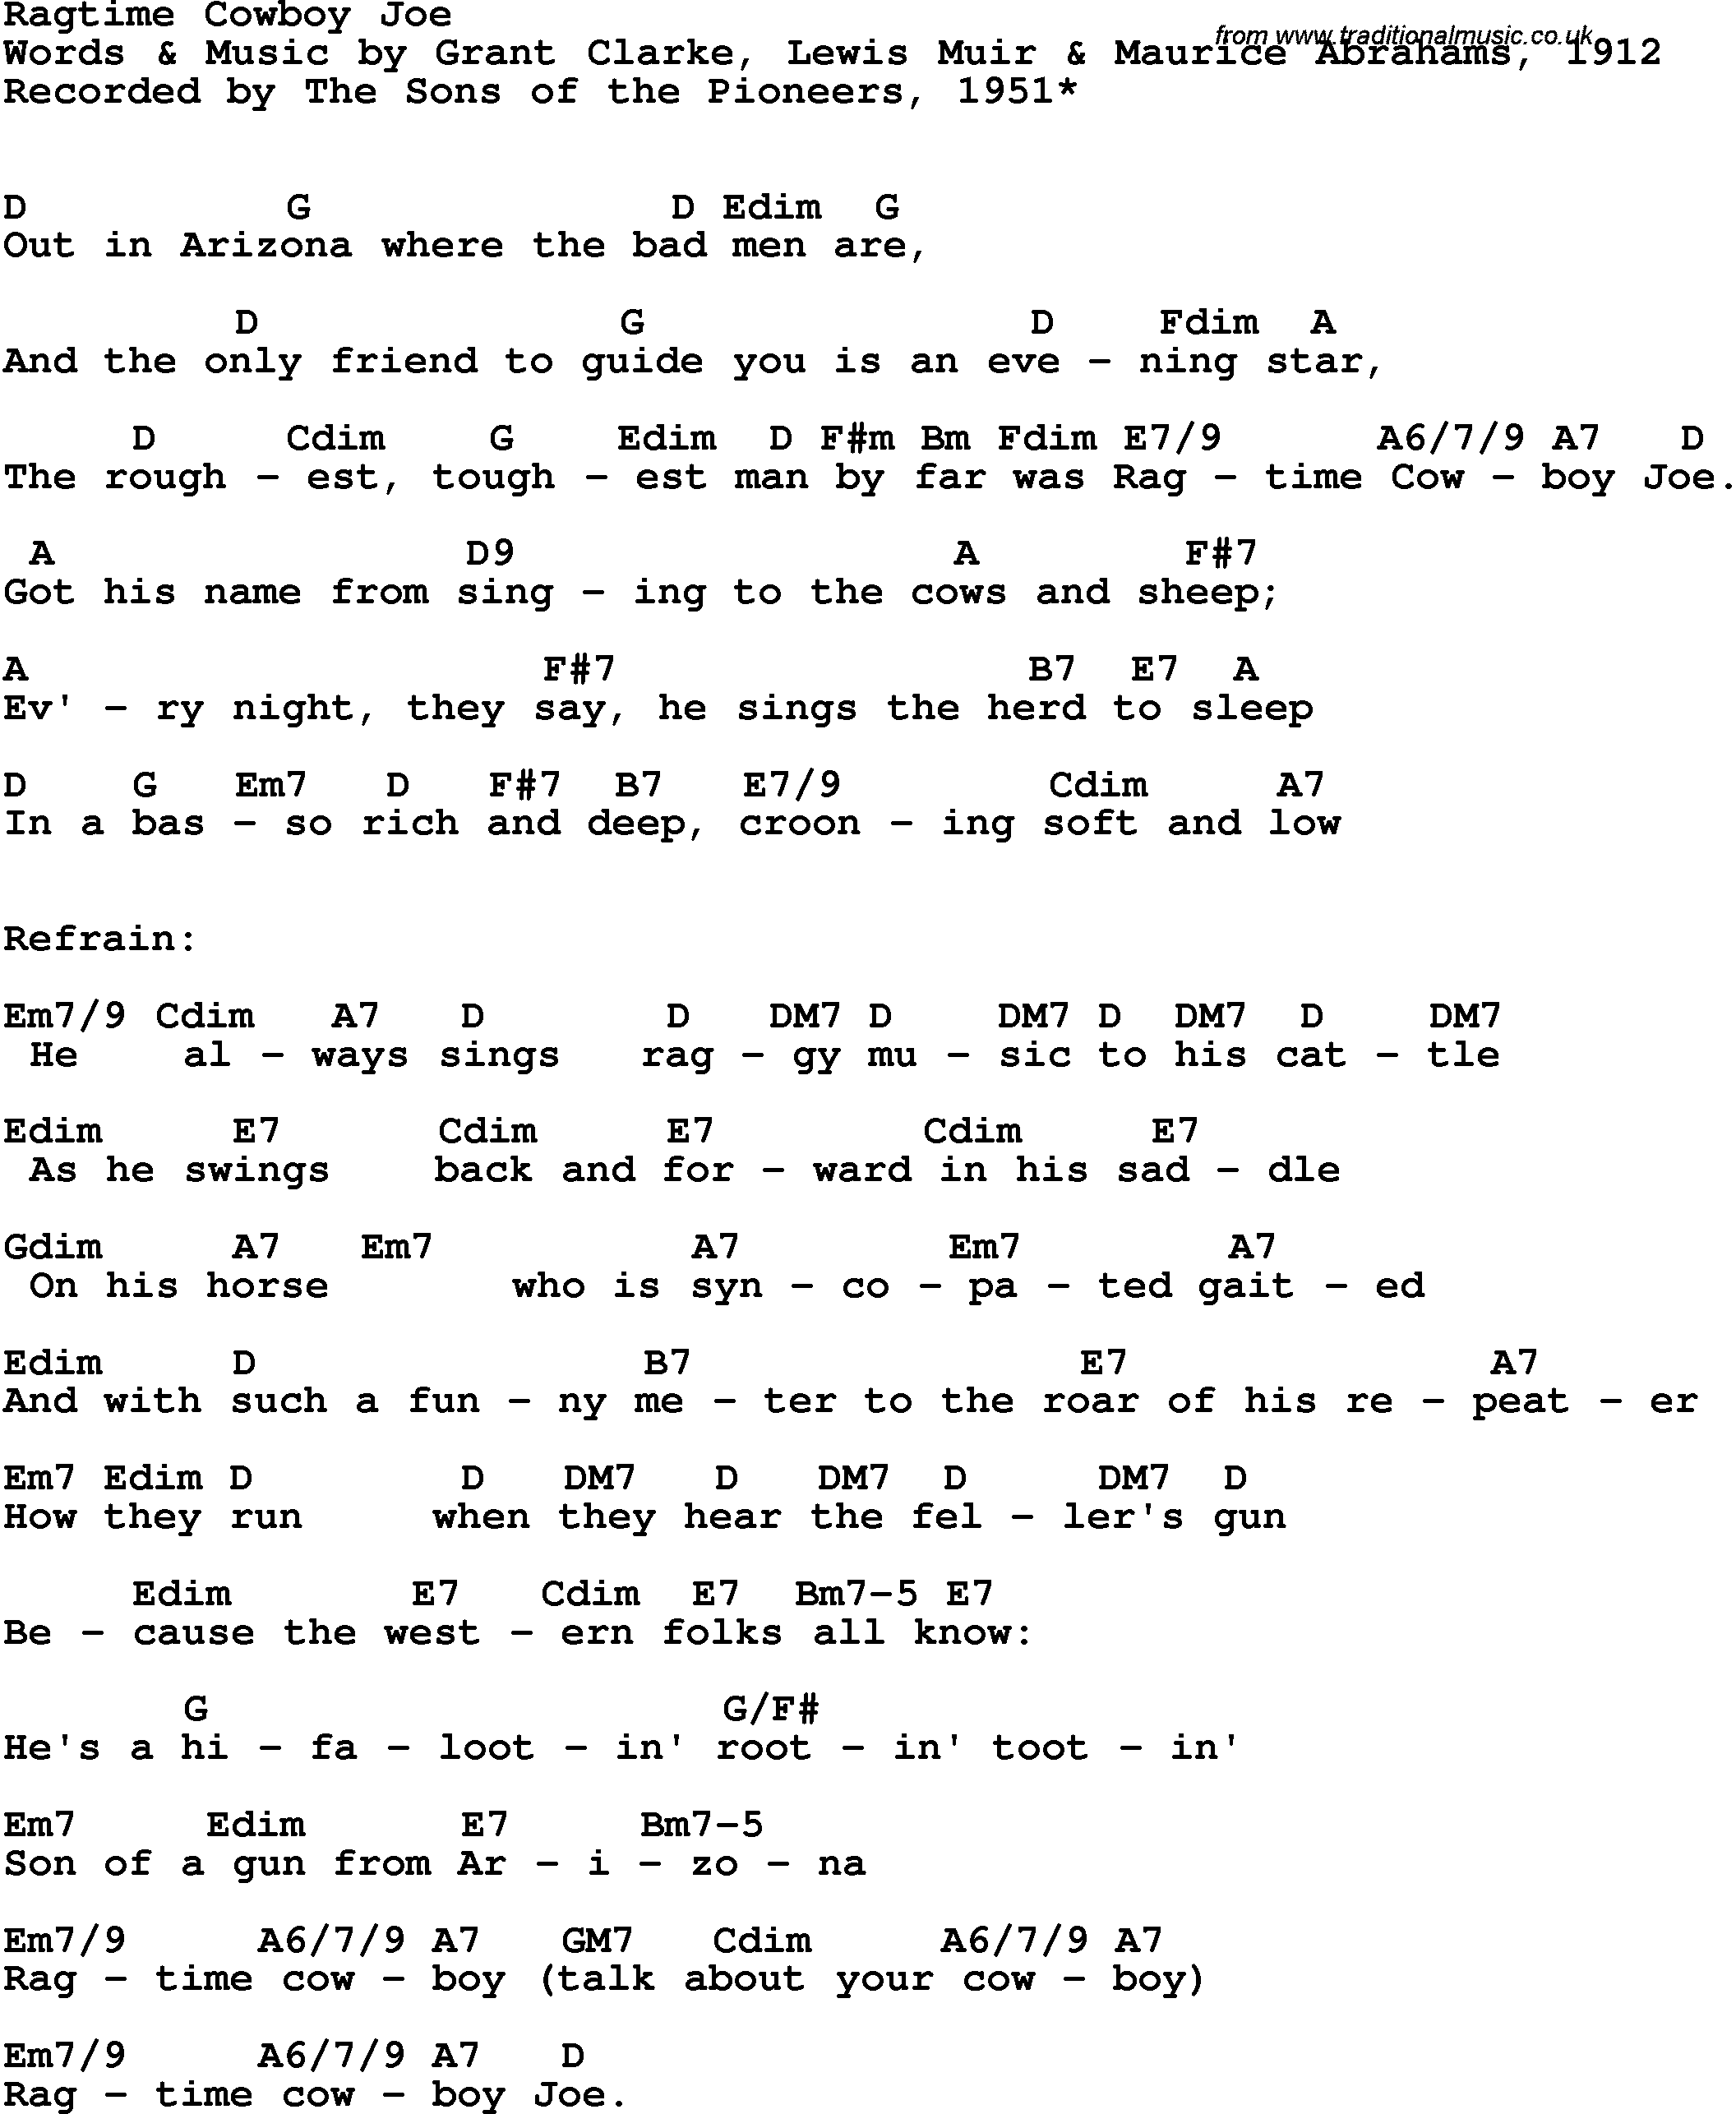 Song Lyrics with guitar chords for Ragtime Cowboy Joe - The Sons Of The Pioneers, 1951